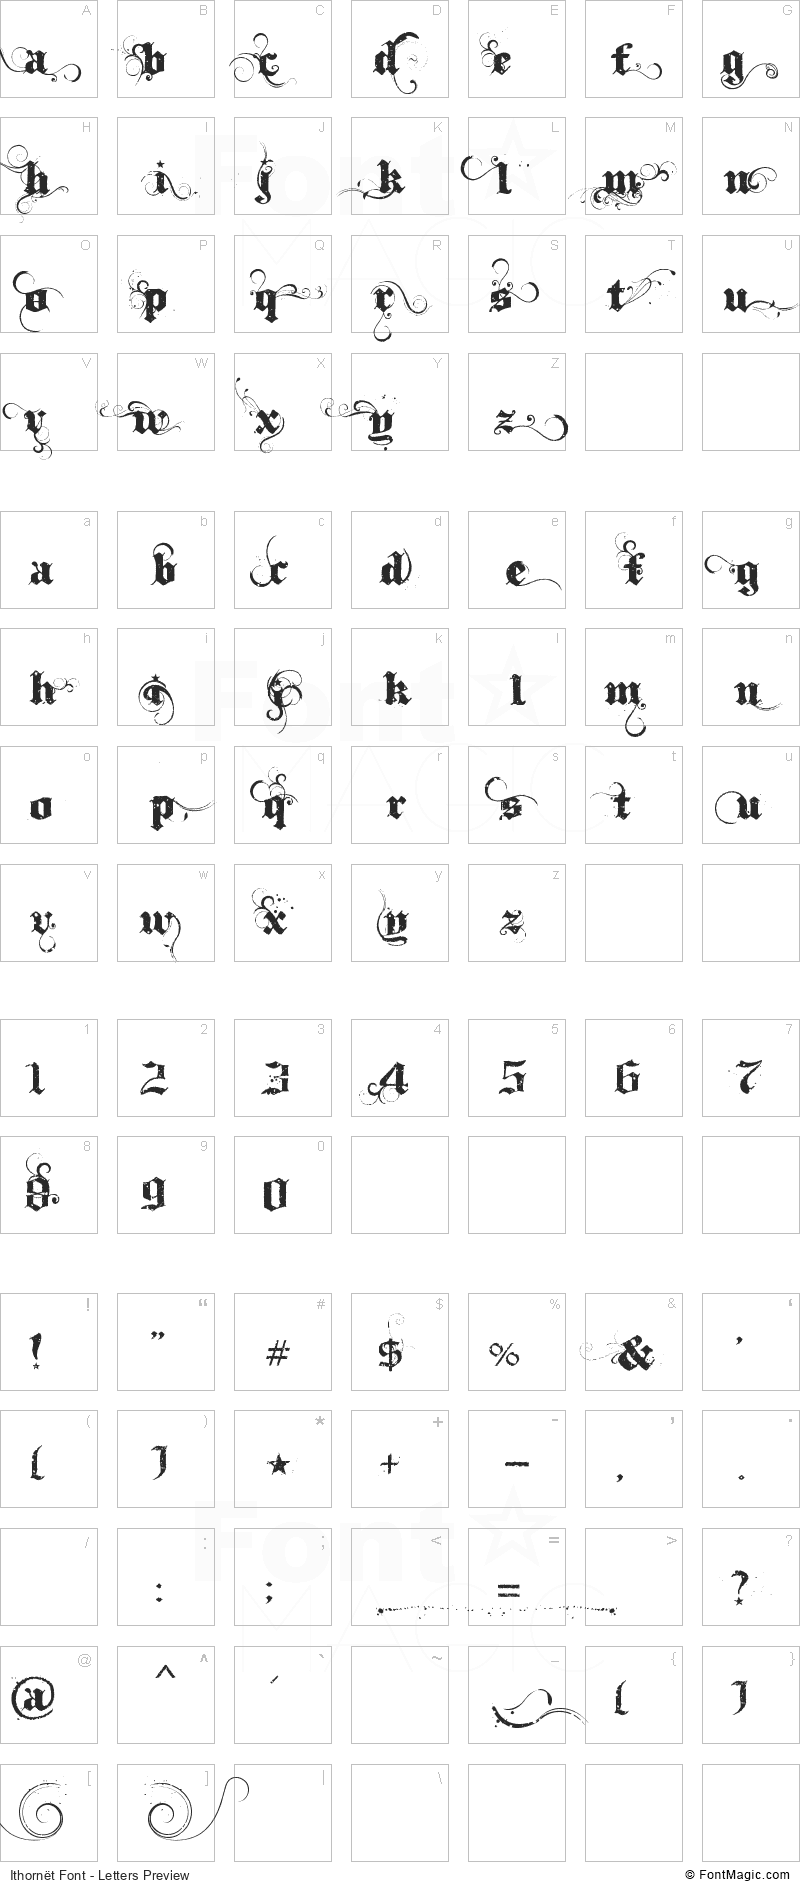 Ithornët Font - All Latters Preview Chart